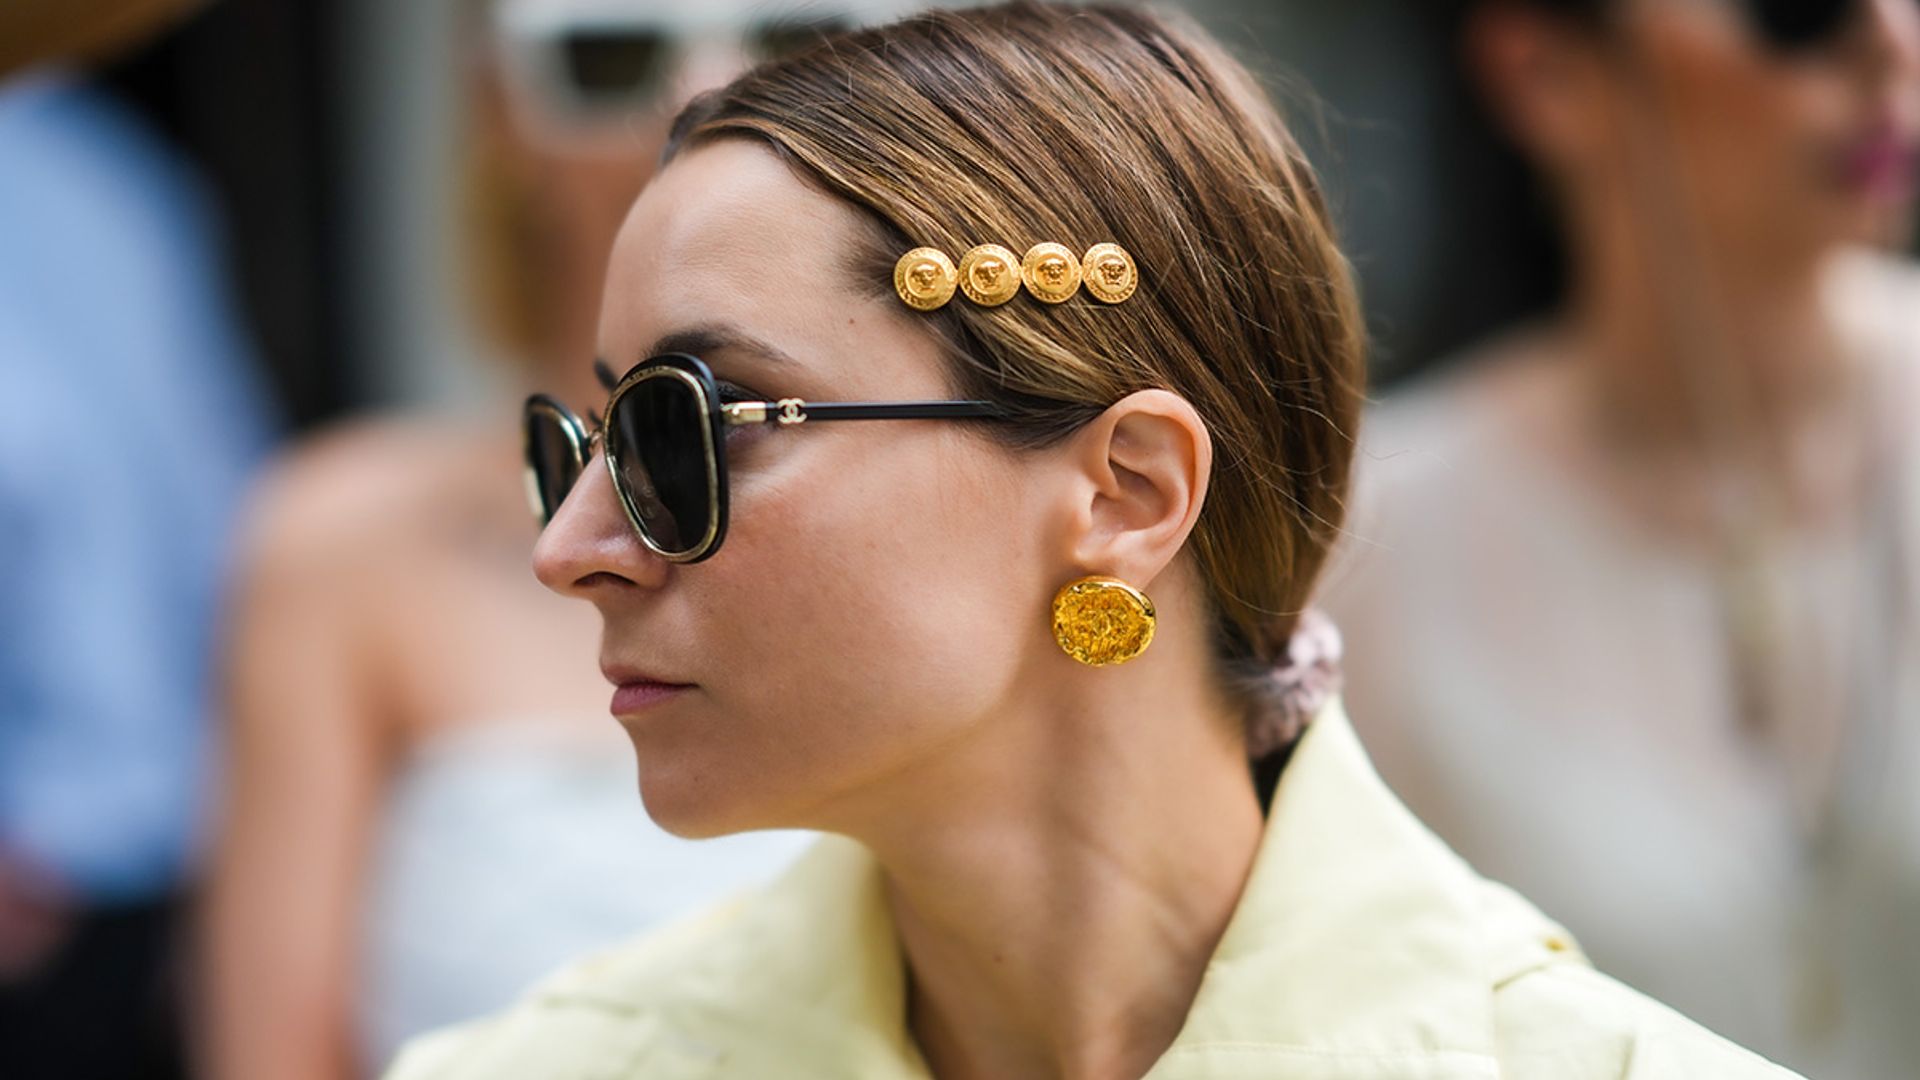 8 pairs of vintage clip-on earrings that you absolutely need in